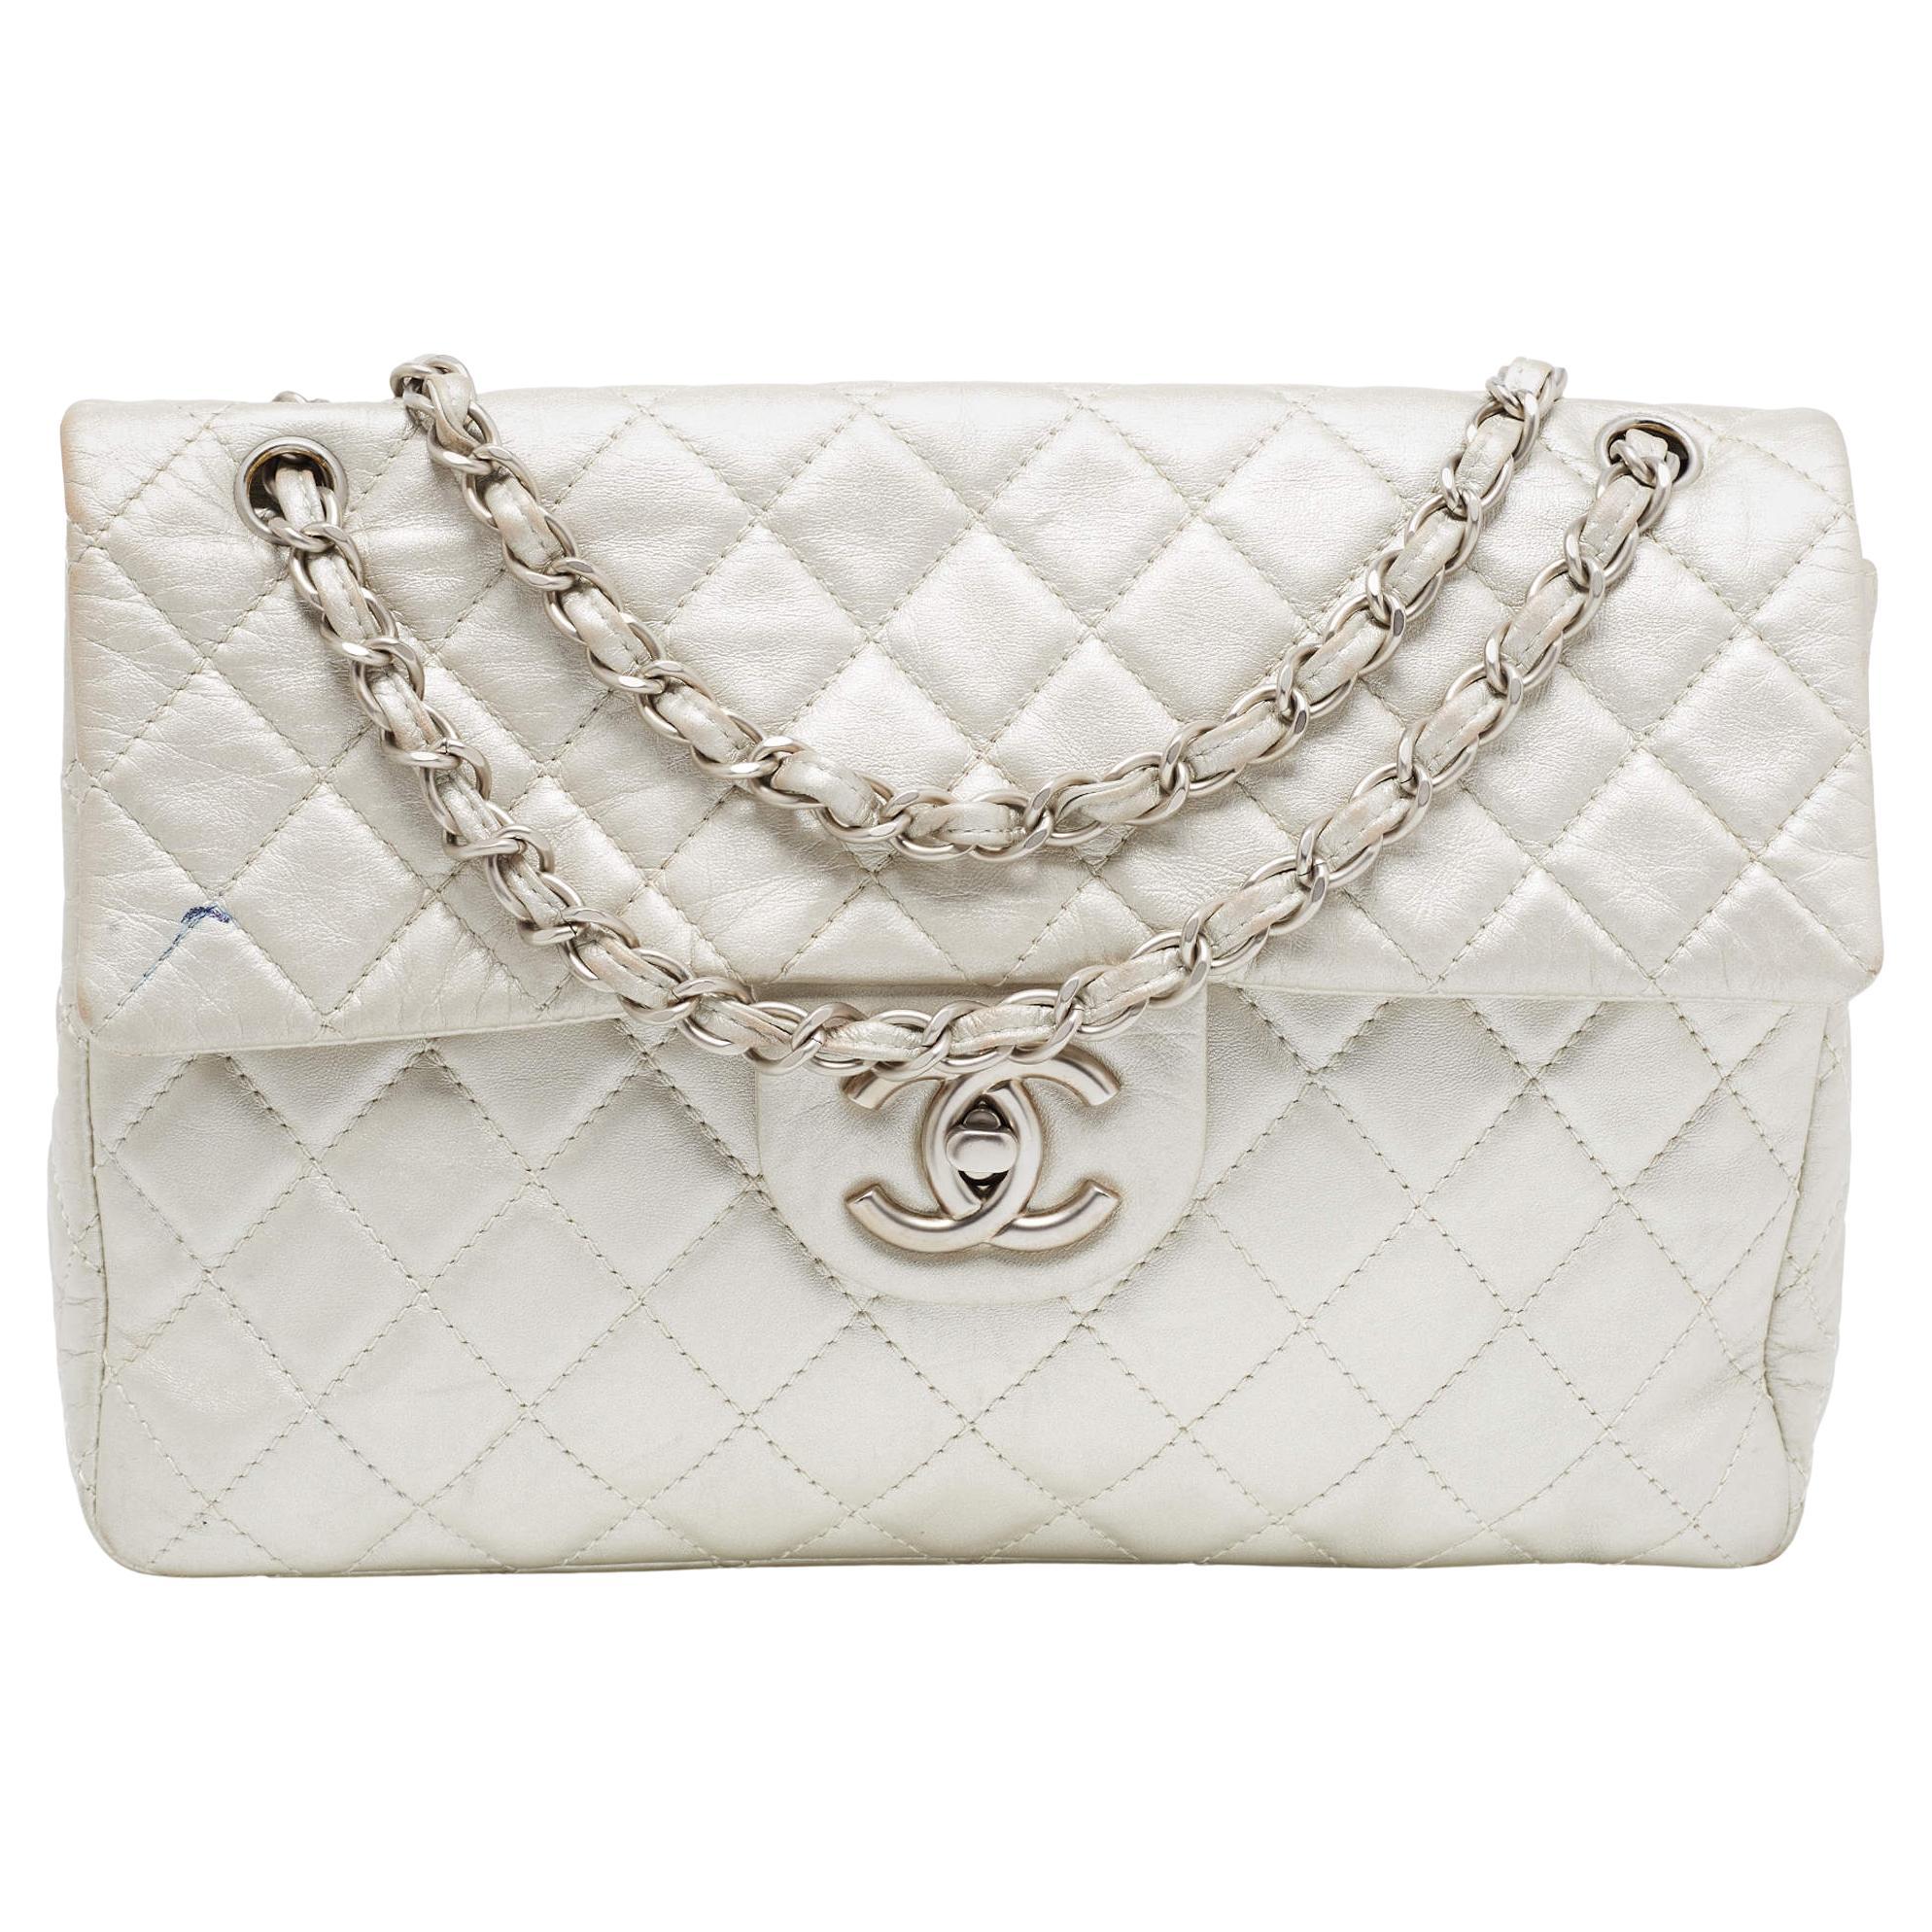 Chanel Metallic Grey Quilted Leather Maxi Classic Single Flap Bag For Sale